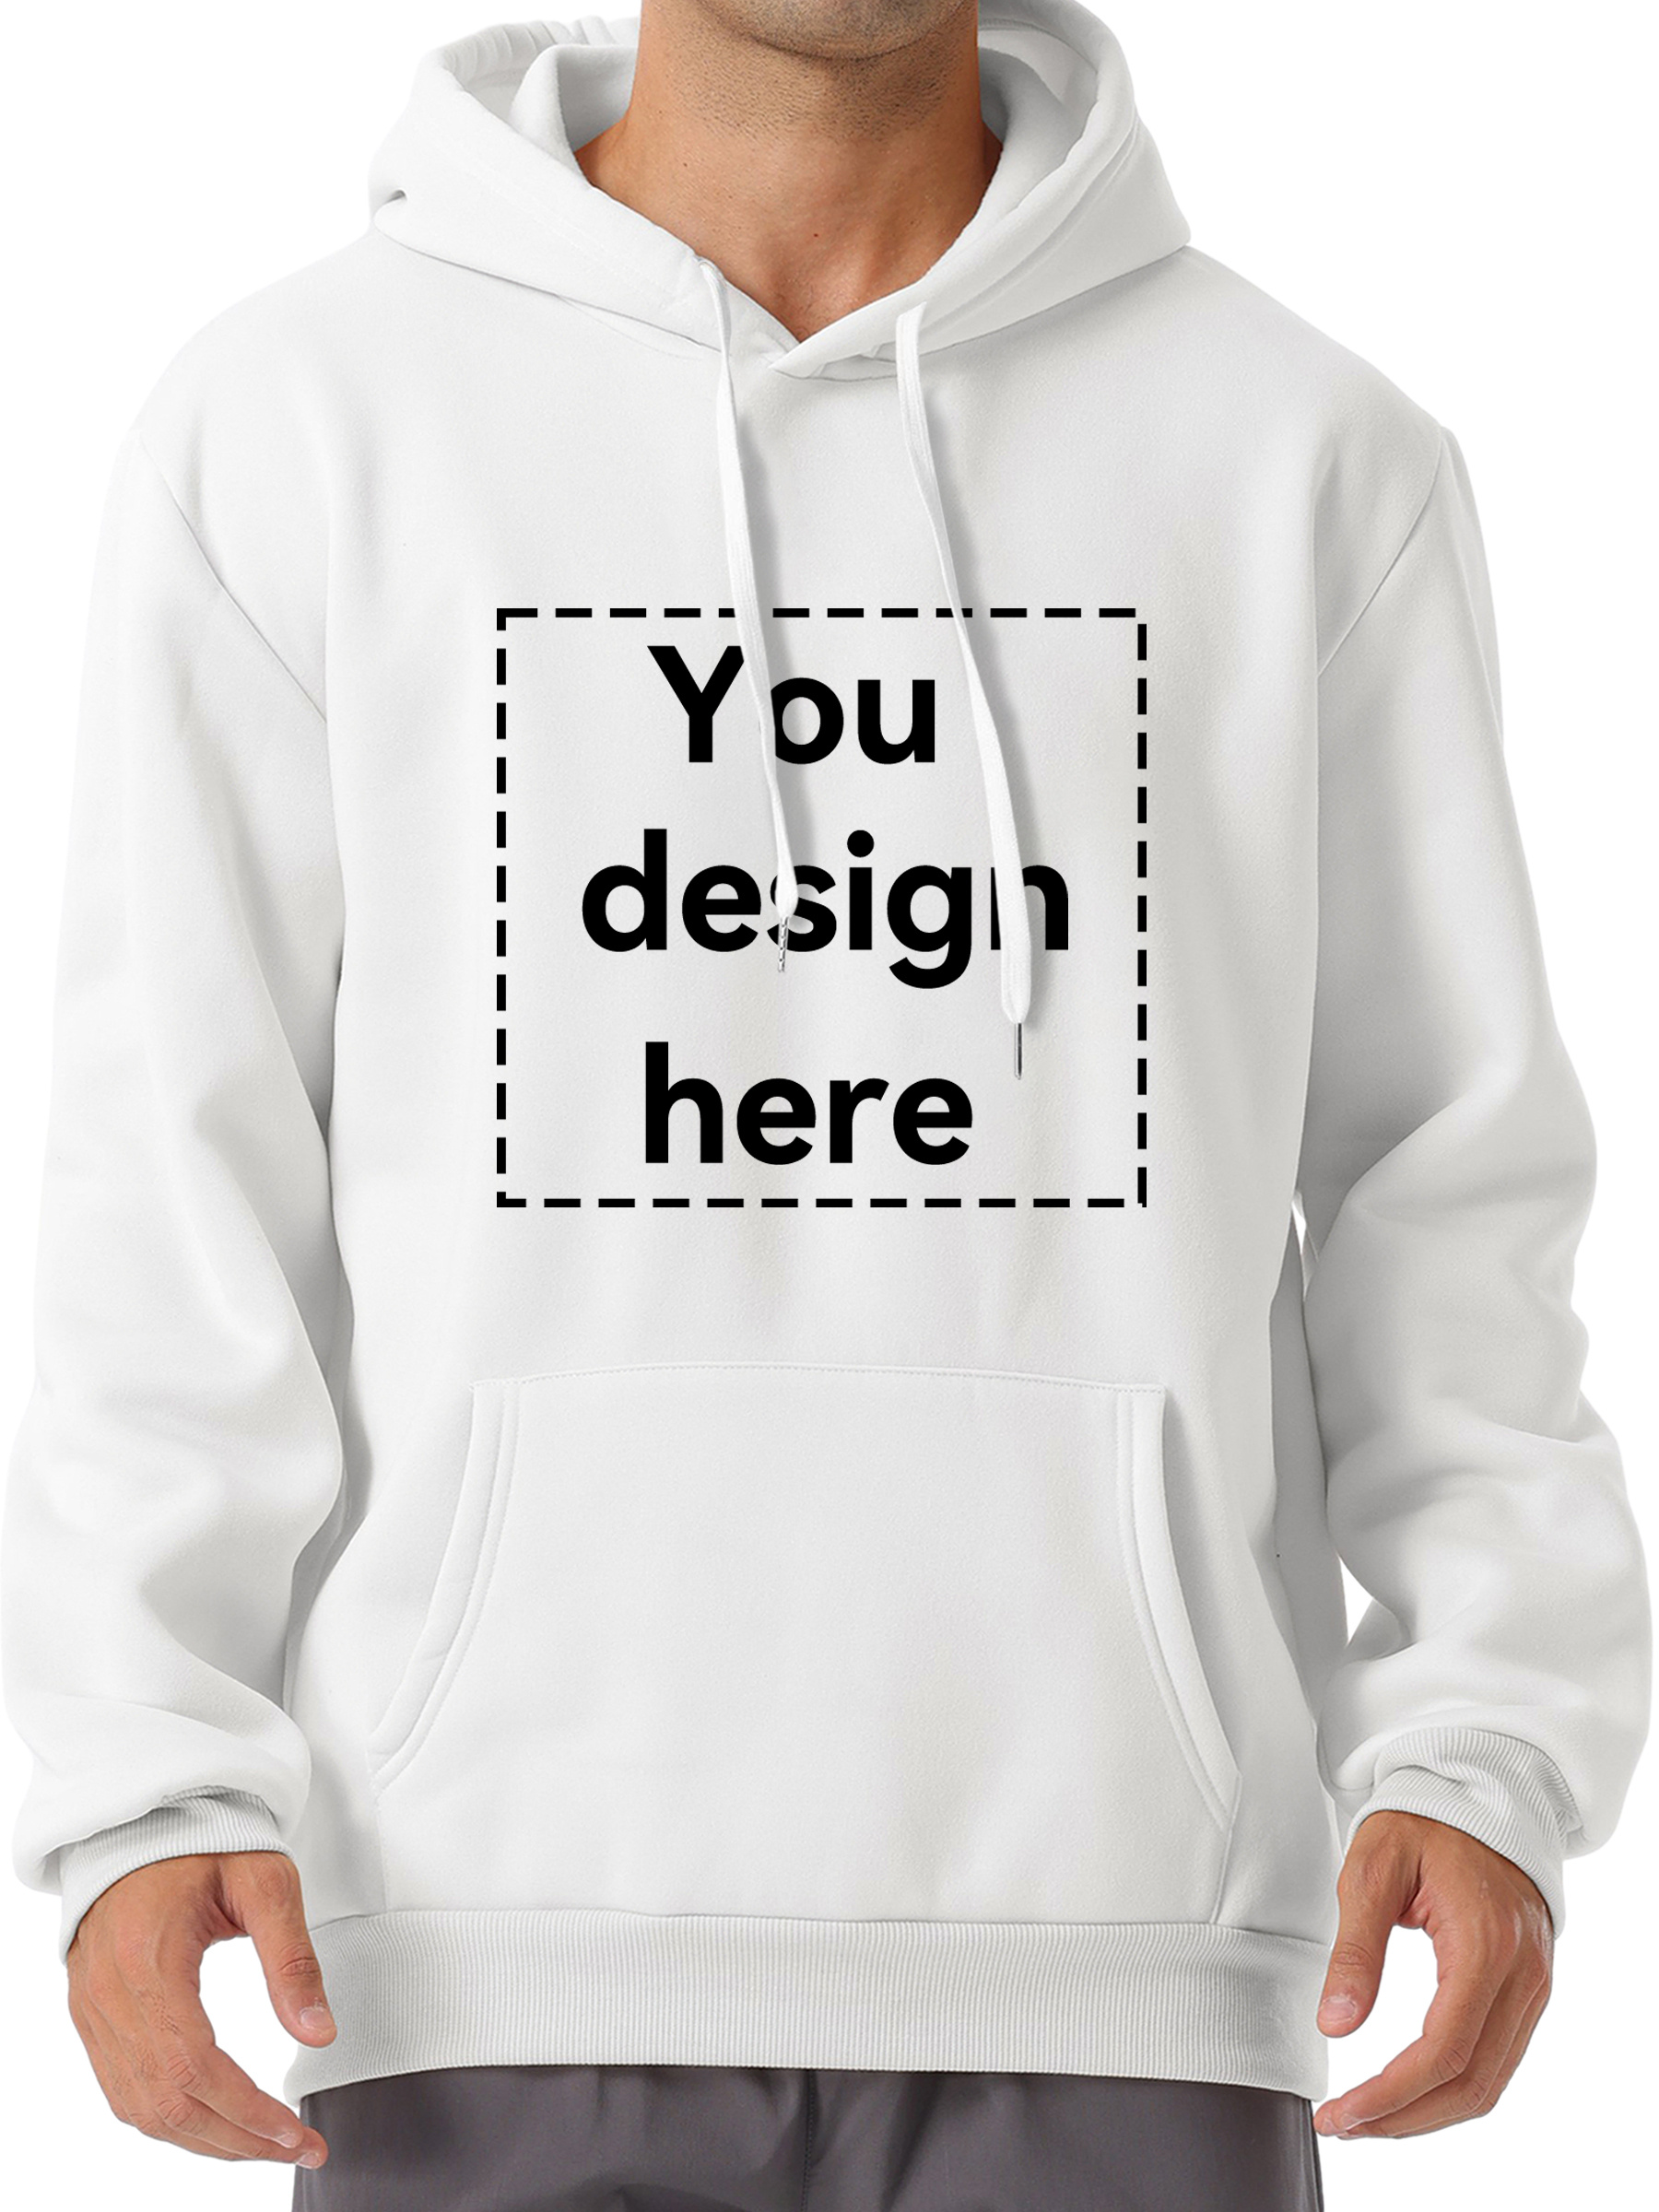 you design here letter print customized kangaroo pocket hoodie casual long sleeve hoodies pullover sweatshirt mens clothing for fall winter details 25